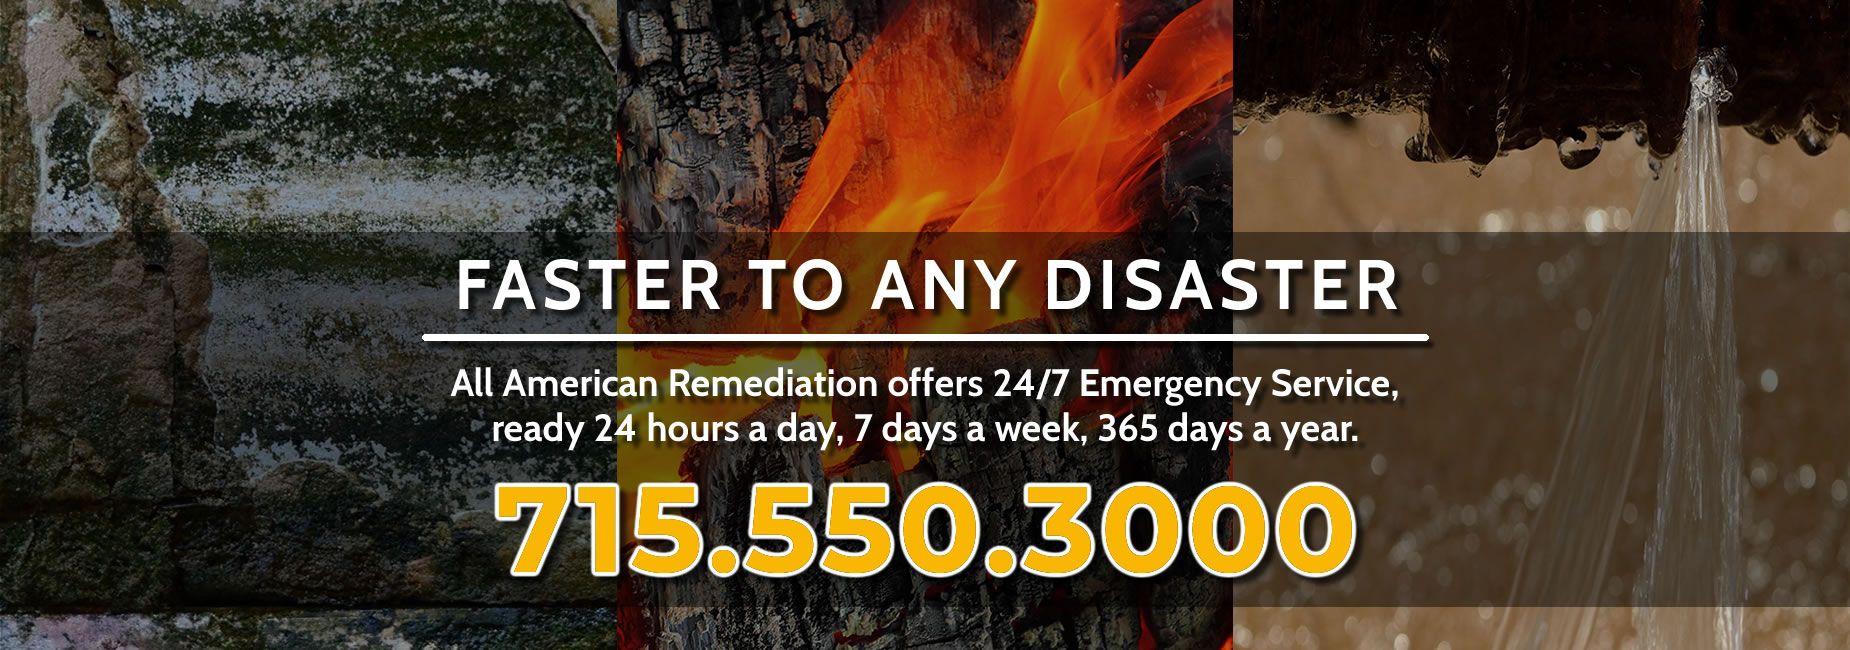 Faster To Any Disaster - All American Remediation offers 24/7 Emergency Service, ready 24 hours a day, 7 days a week, 365 days a year. Call 715.550.3000